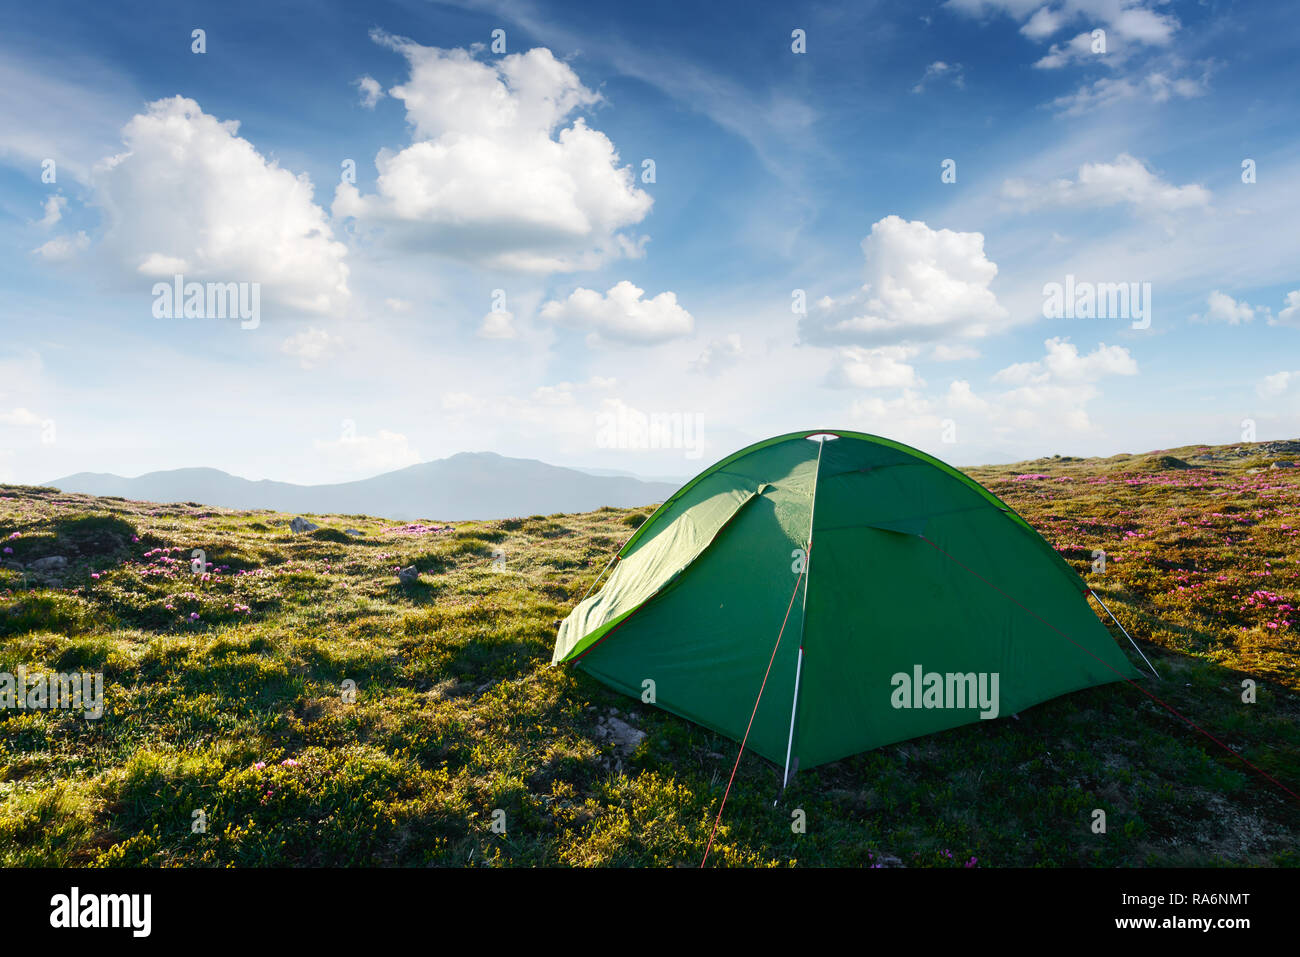 Picturesque scene with green tent and blue sky on spring mountains. Landscape photography Stock Photo